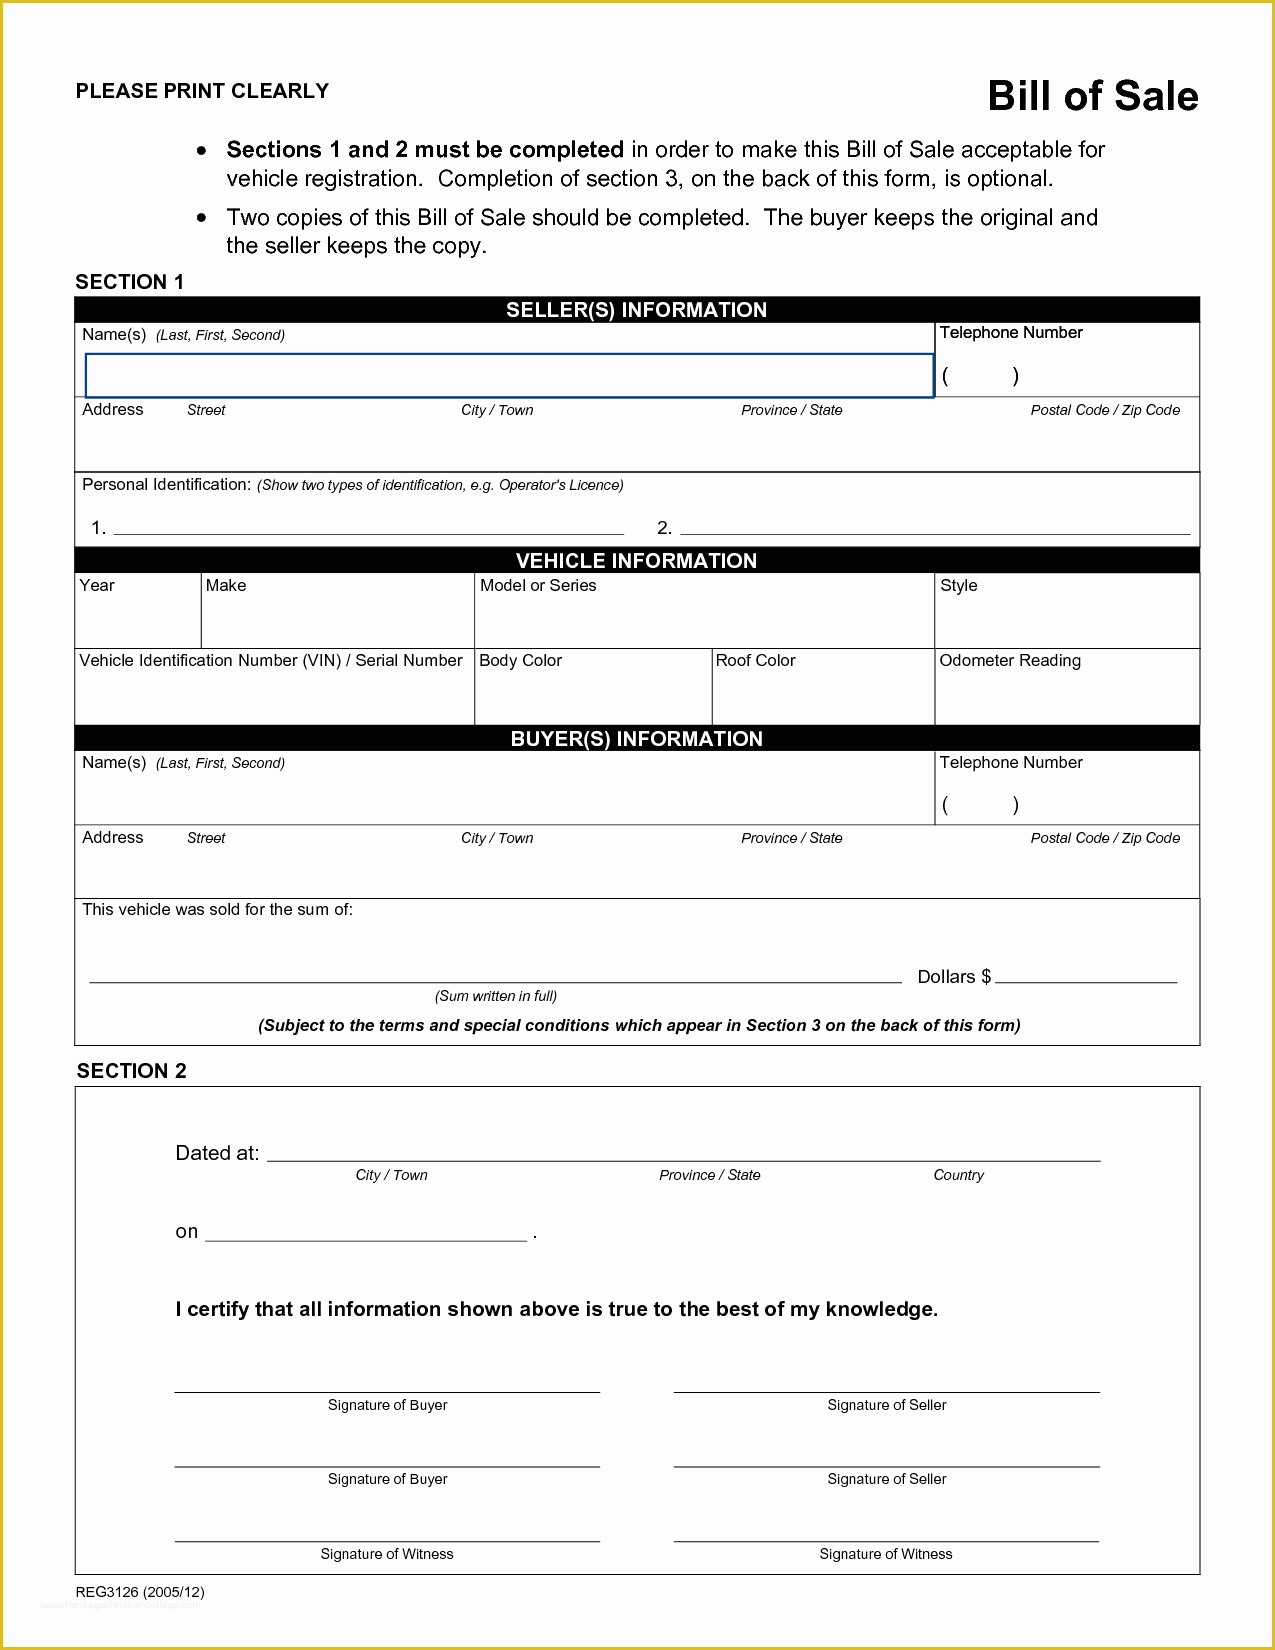 free-vehicle-bill-of-sale-template-of-free-printable-rv-bill-of-sale-form-form-generic